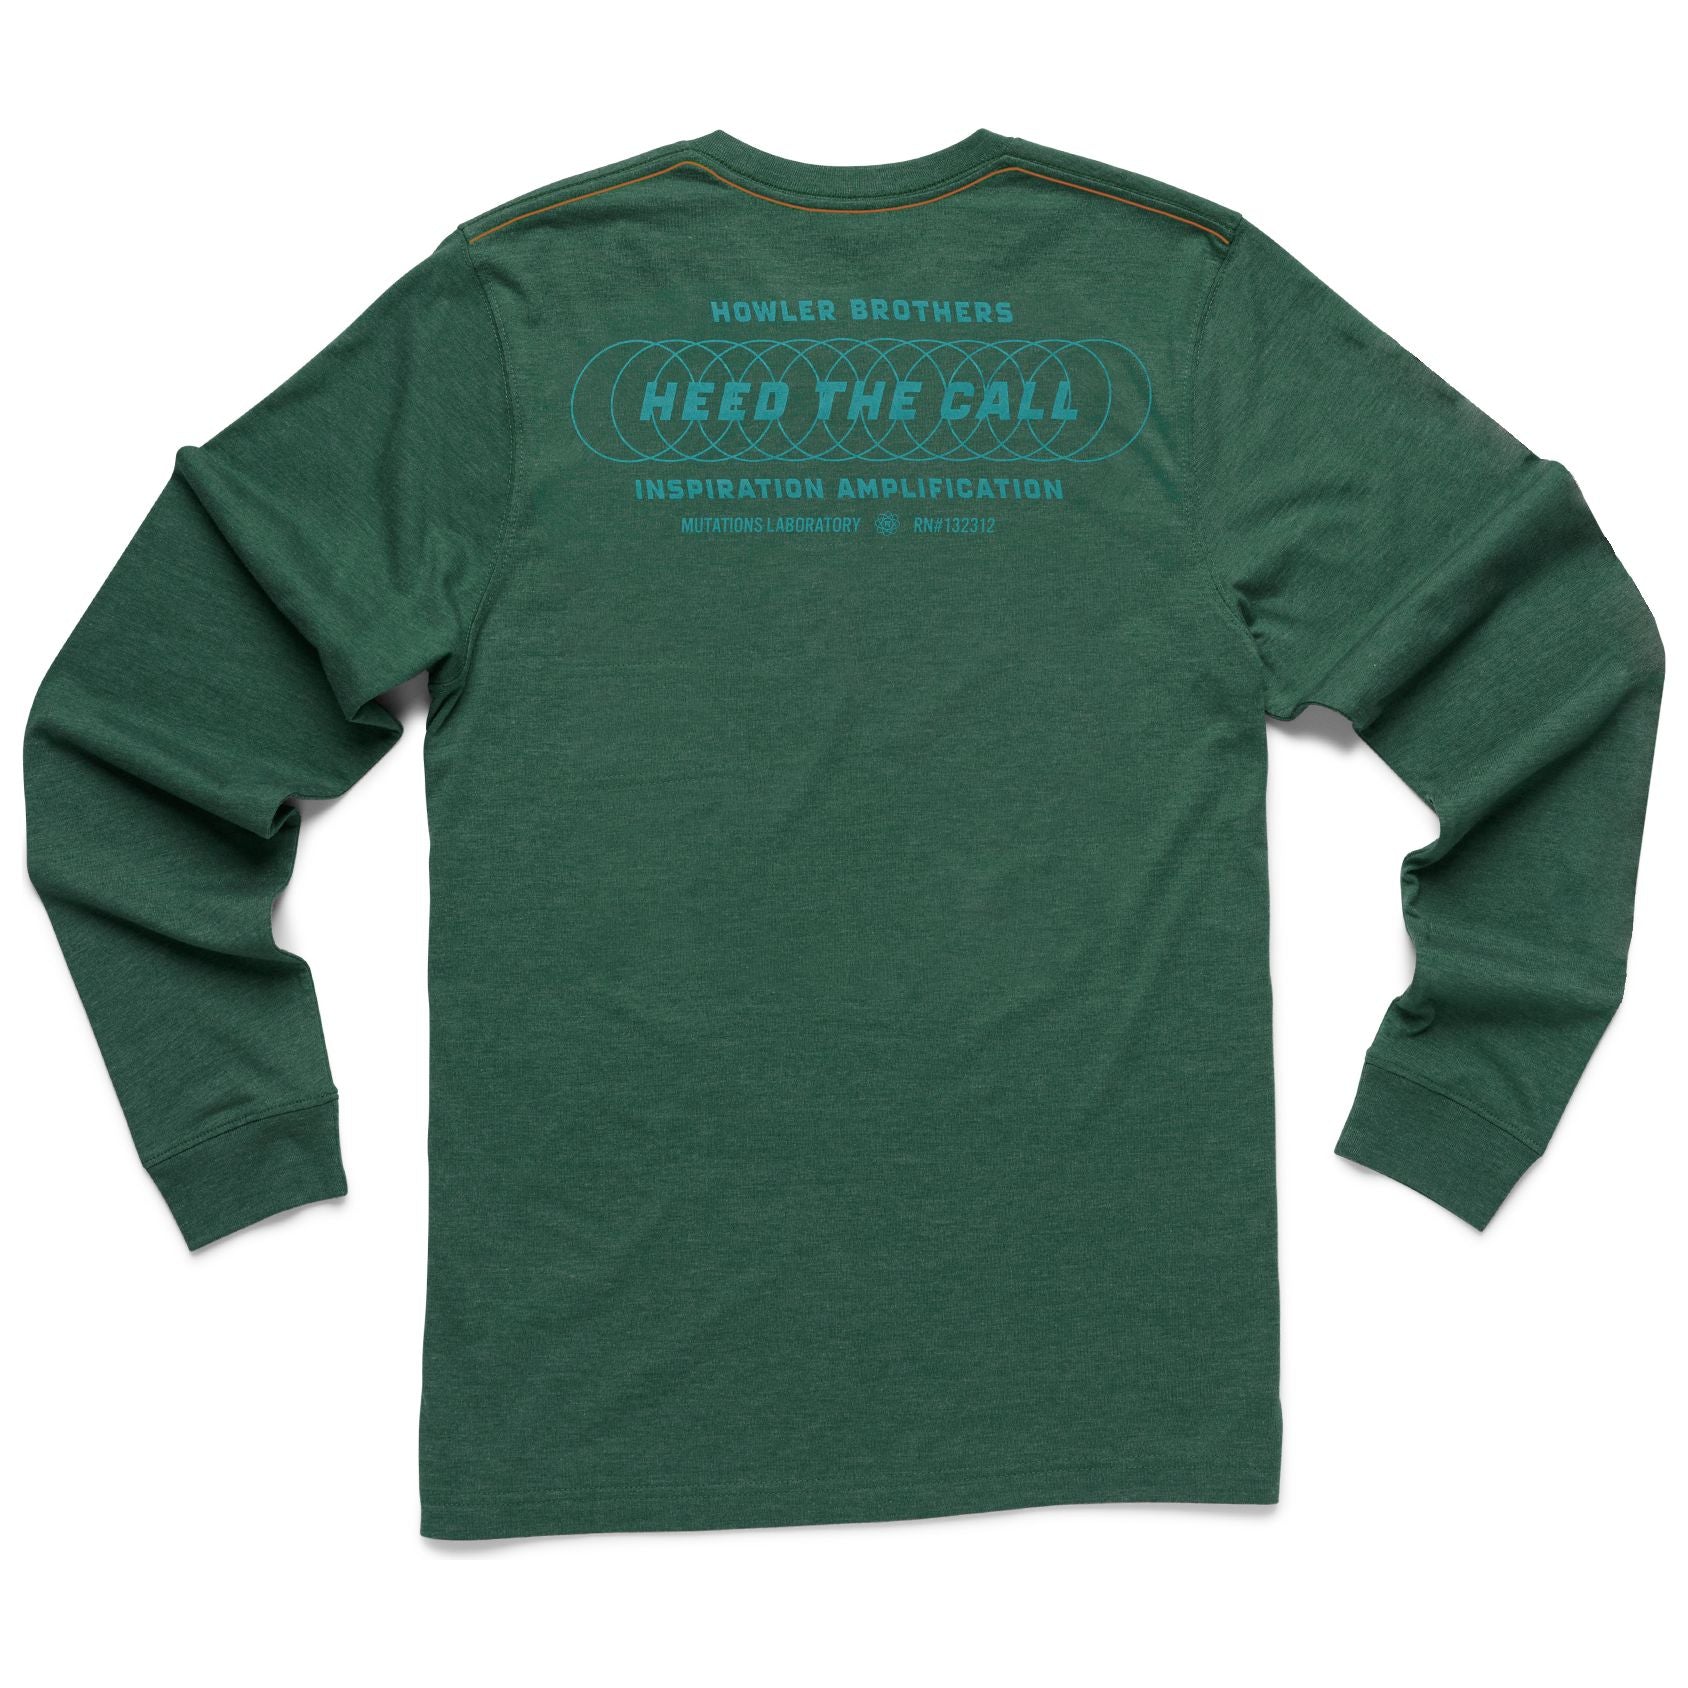 Howler Brothers Select Longsleeve T - Inspiration Amplification : Forest Green Image 01